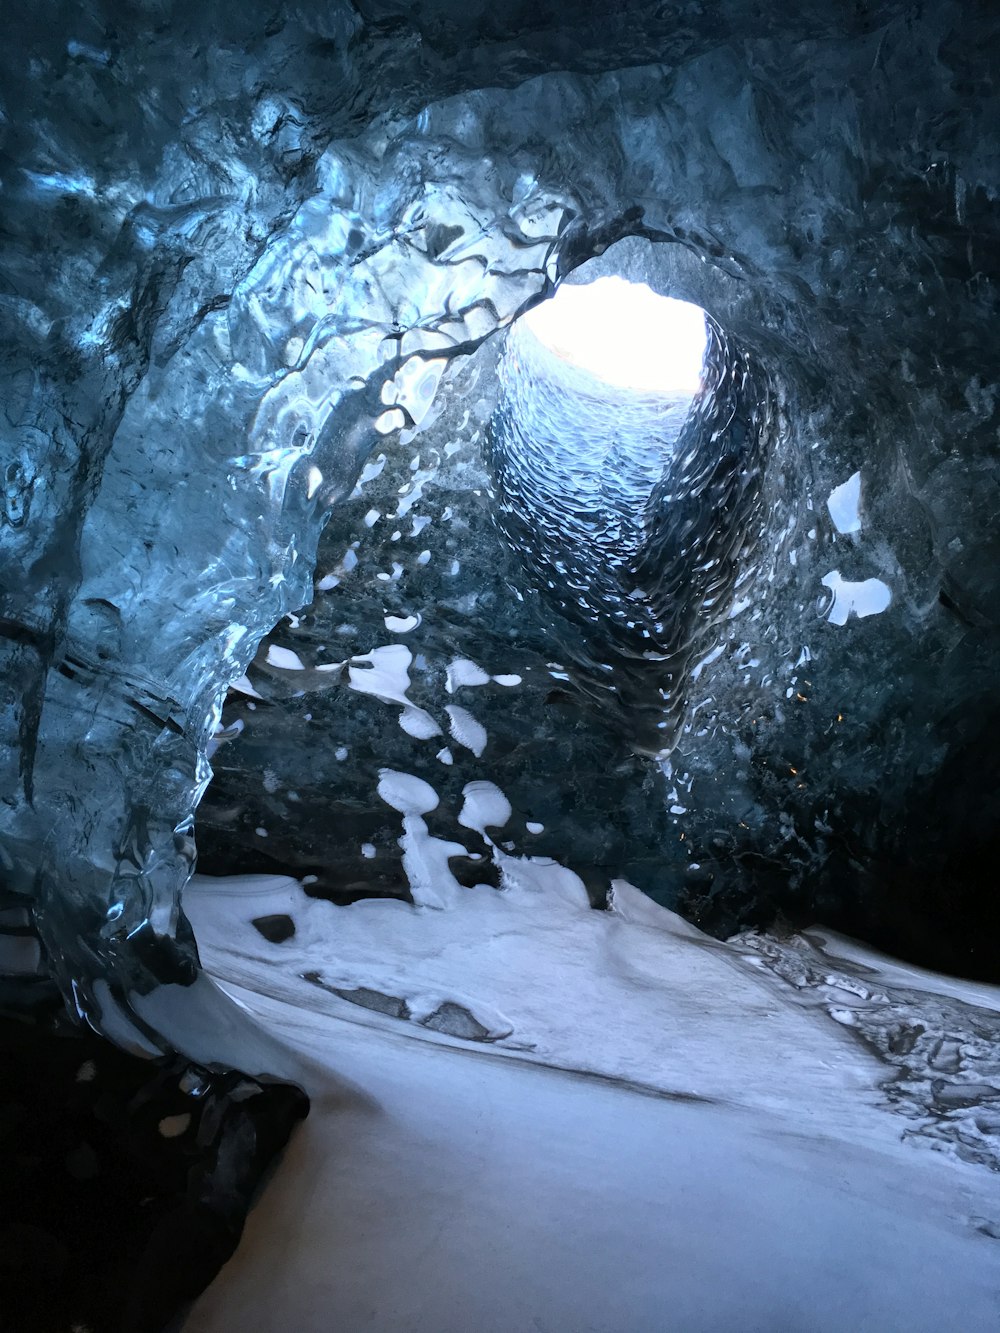 a large ice cave with snow on the ground